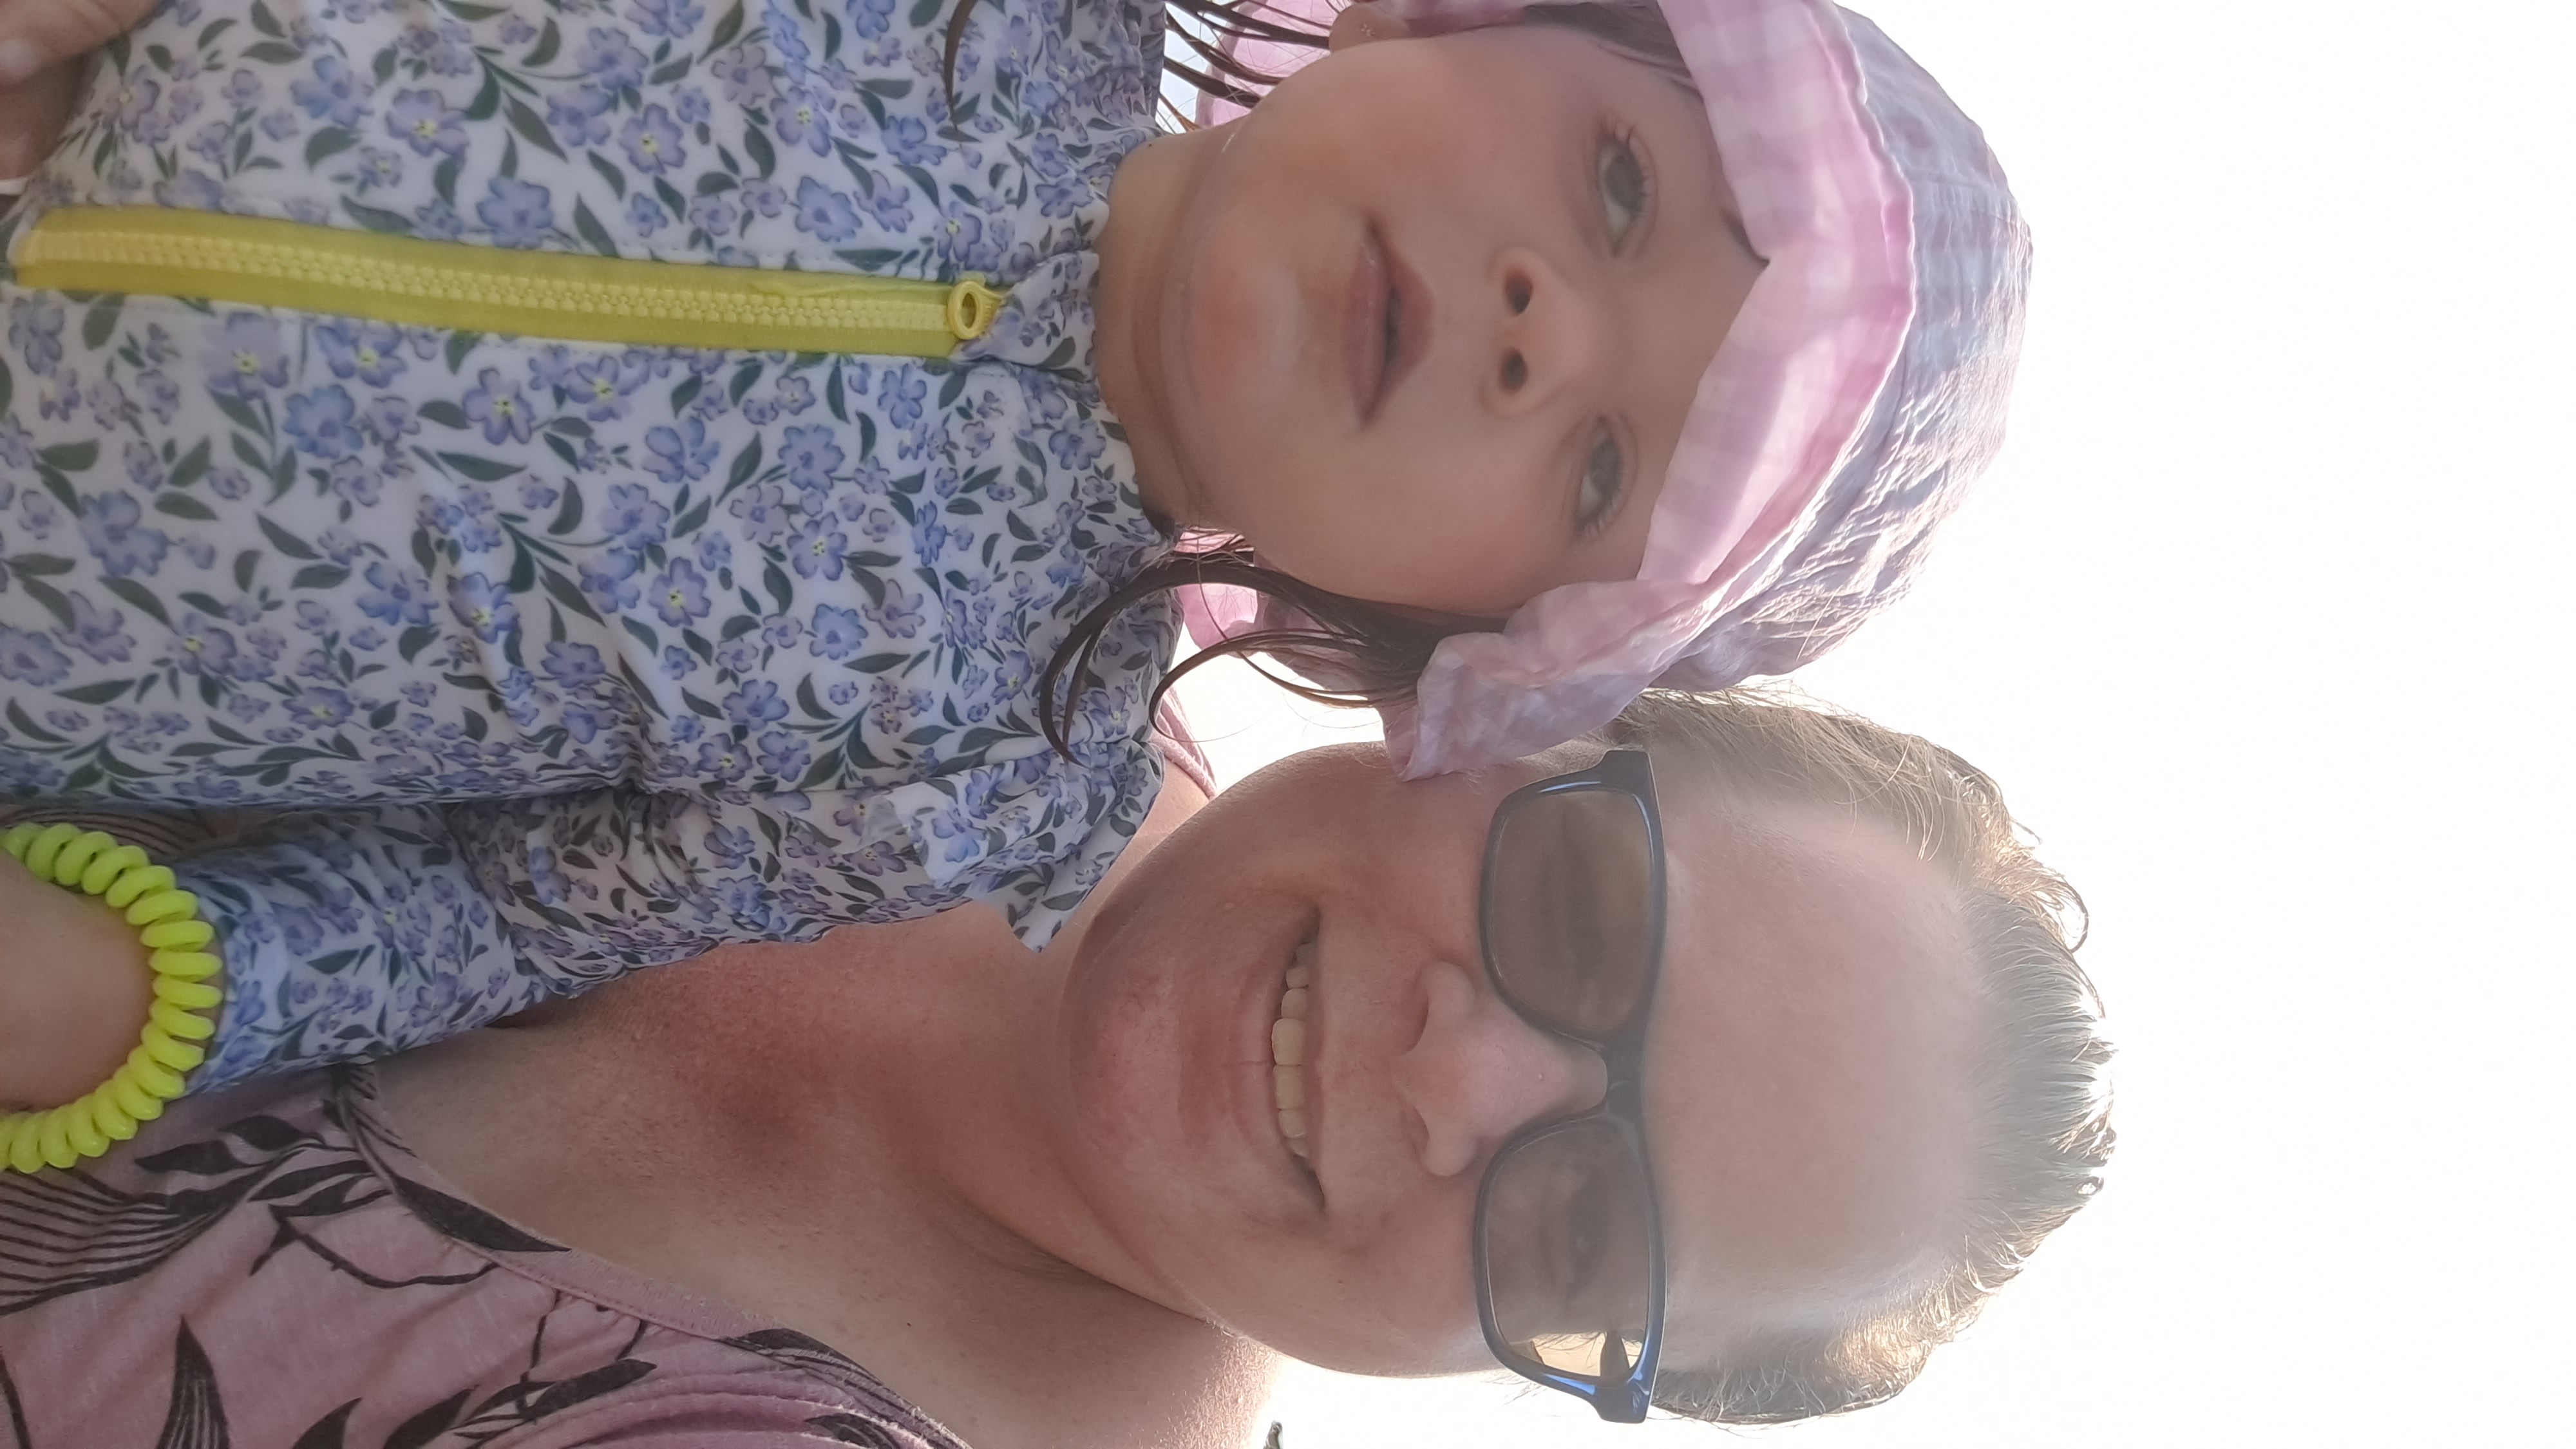 A selfie of a woman wearing sunglasses who has a young girl on her lap who is wearing a coat and hat.